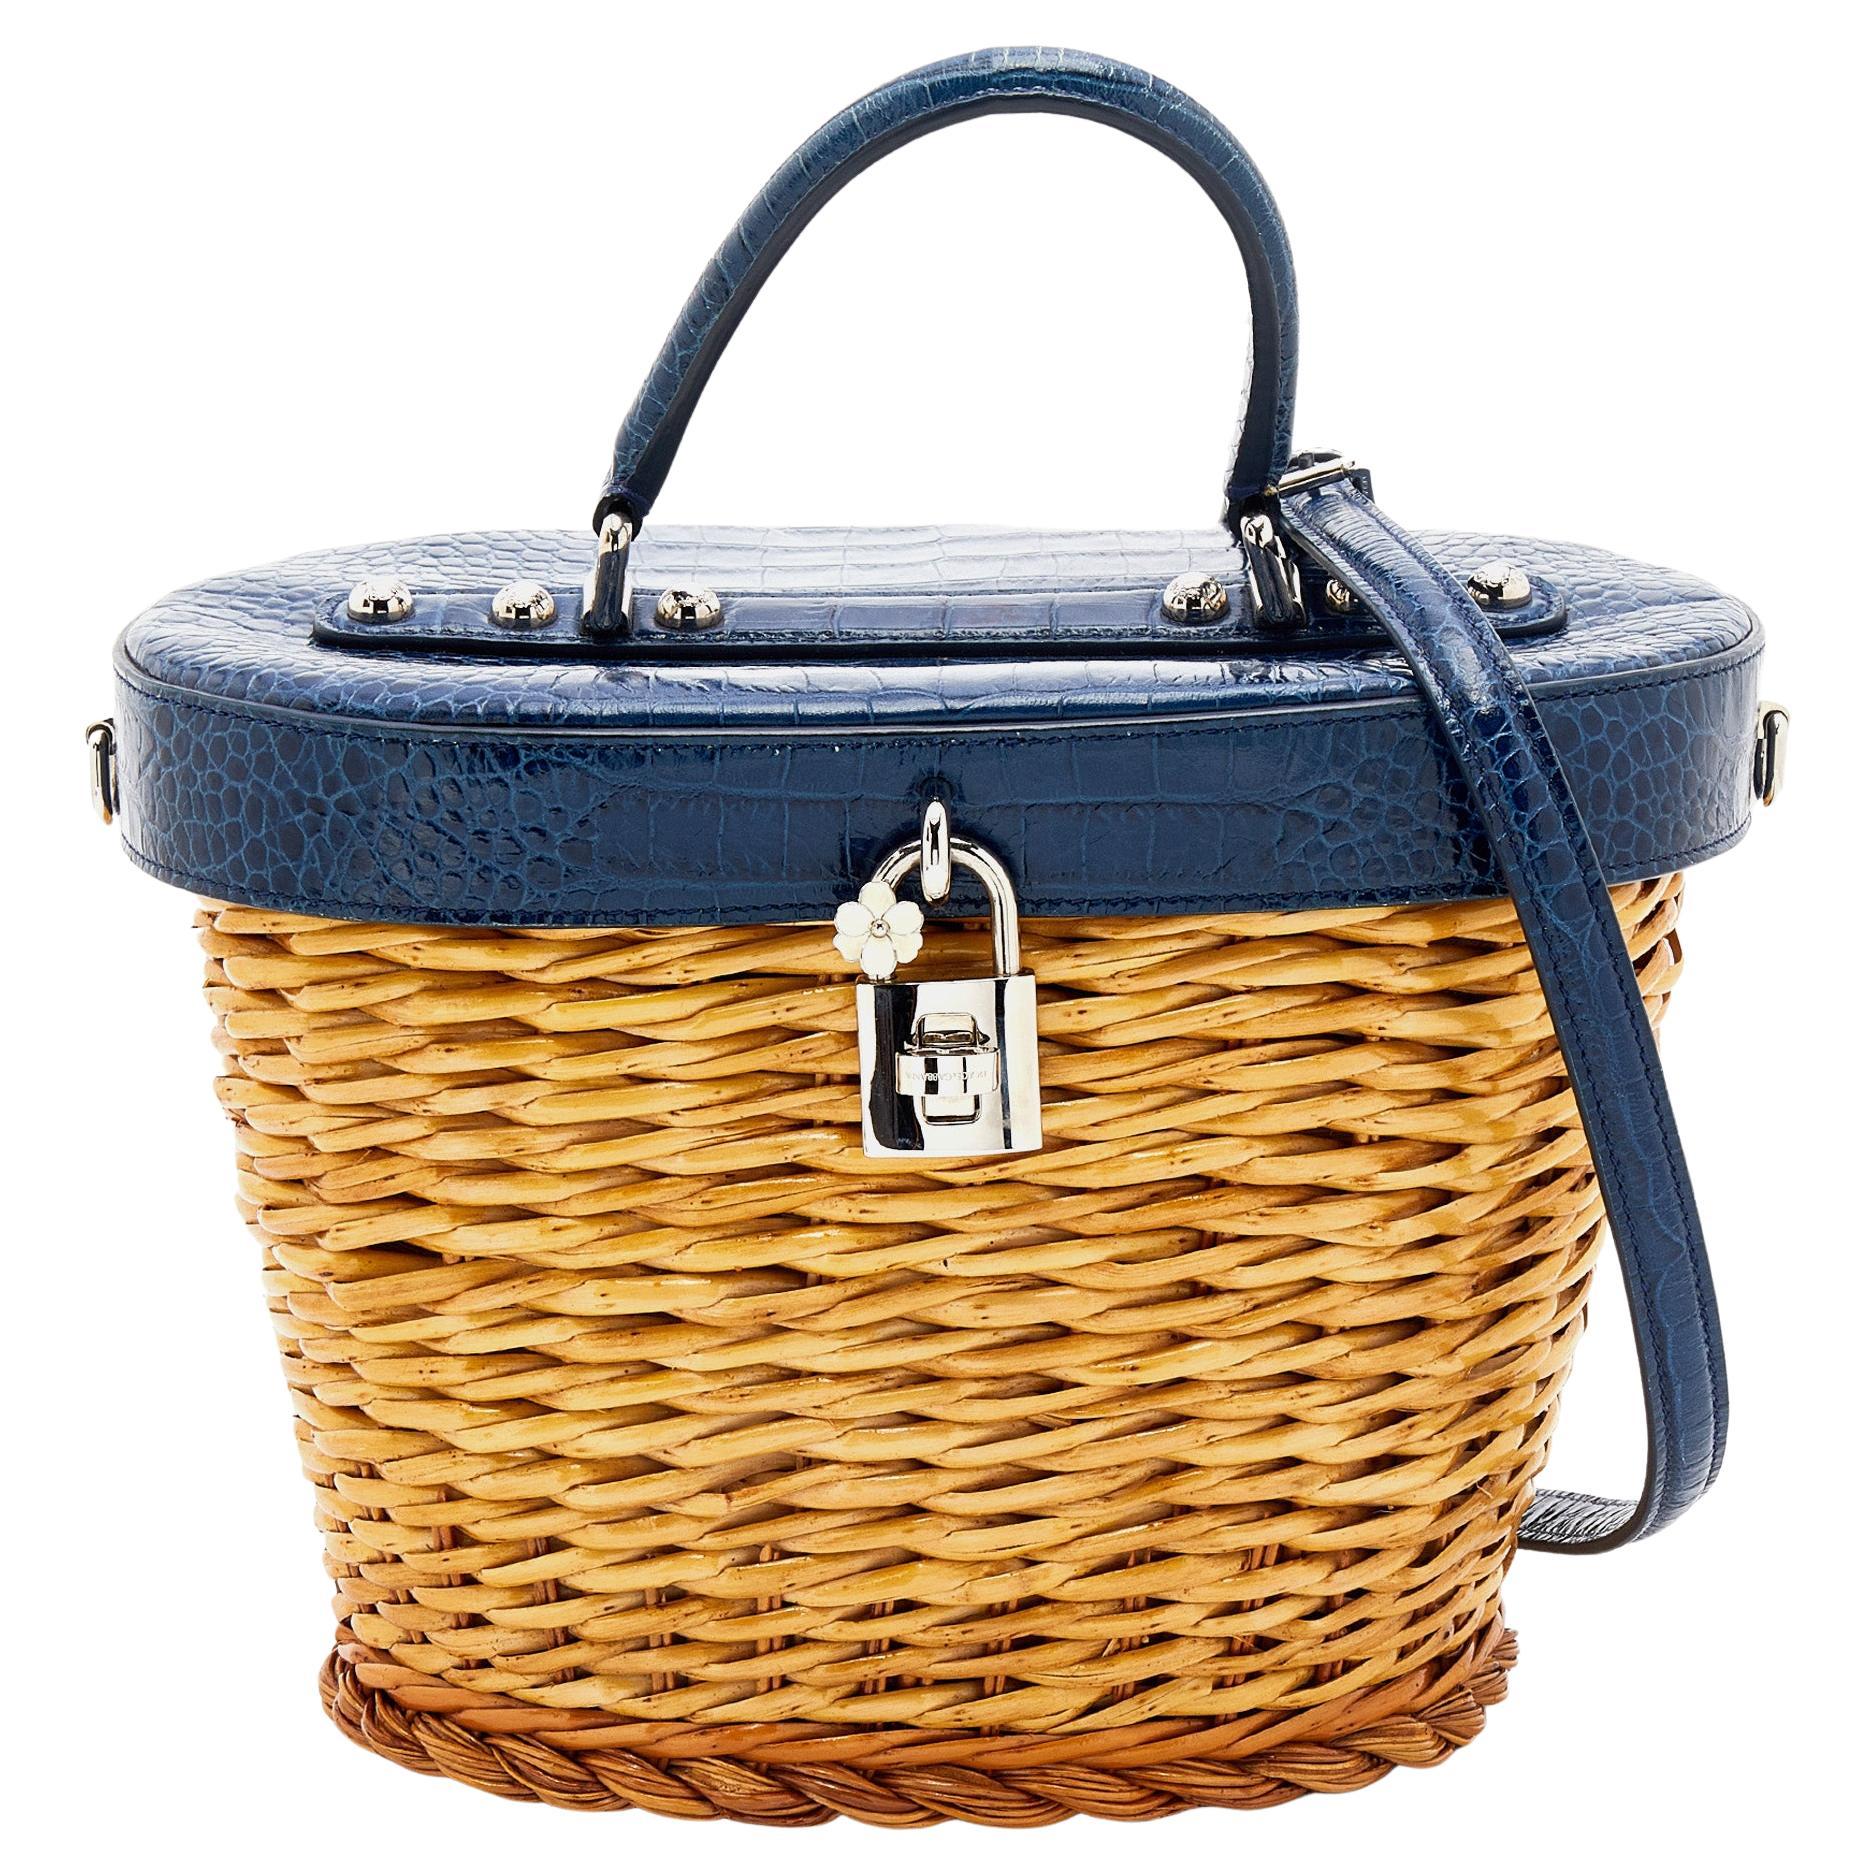 Dolce & Gabbana Blue/Beige Straw And Embossed Leather Wicker Bag